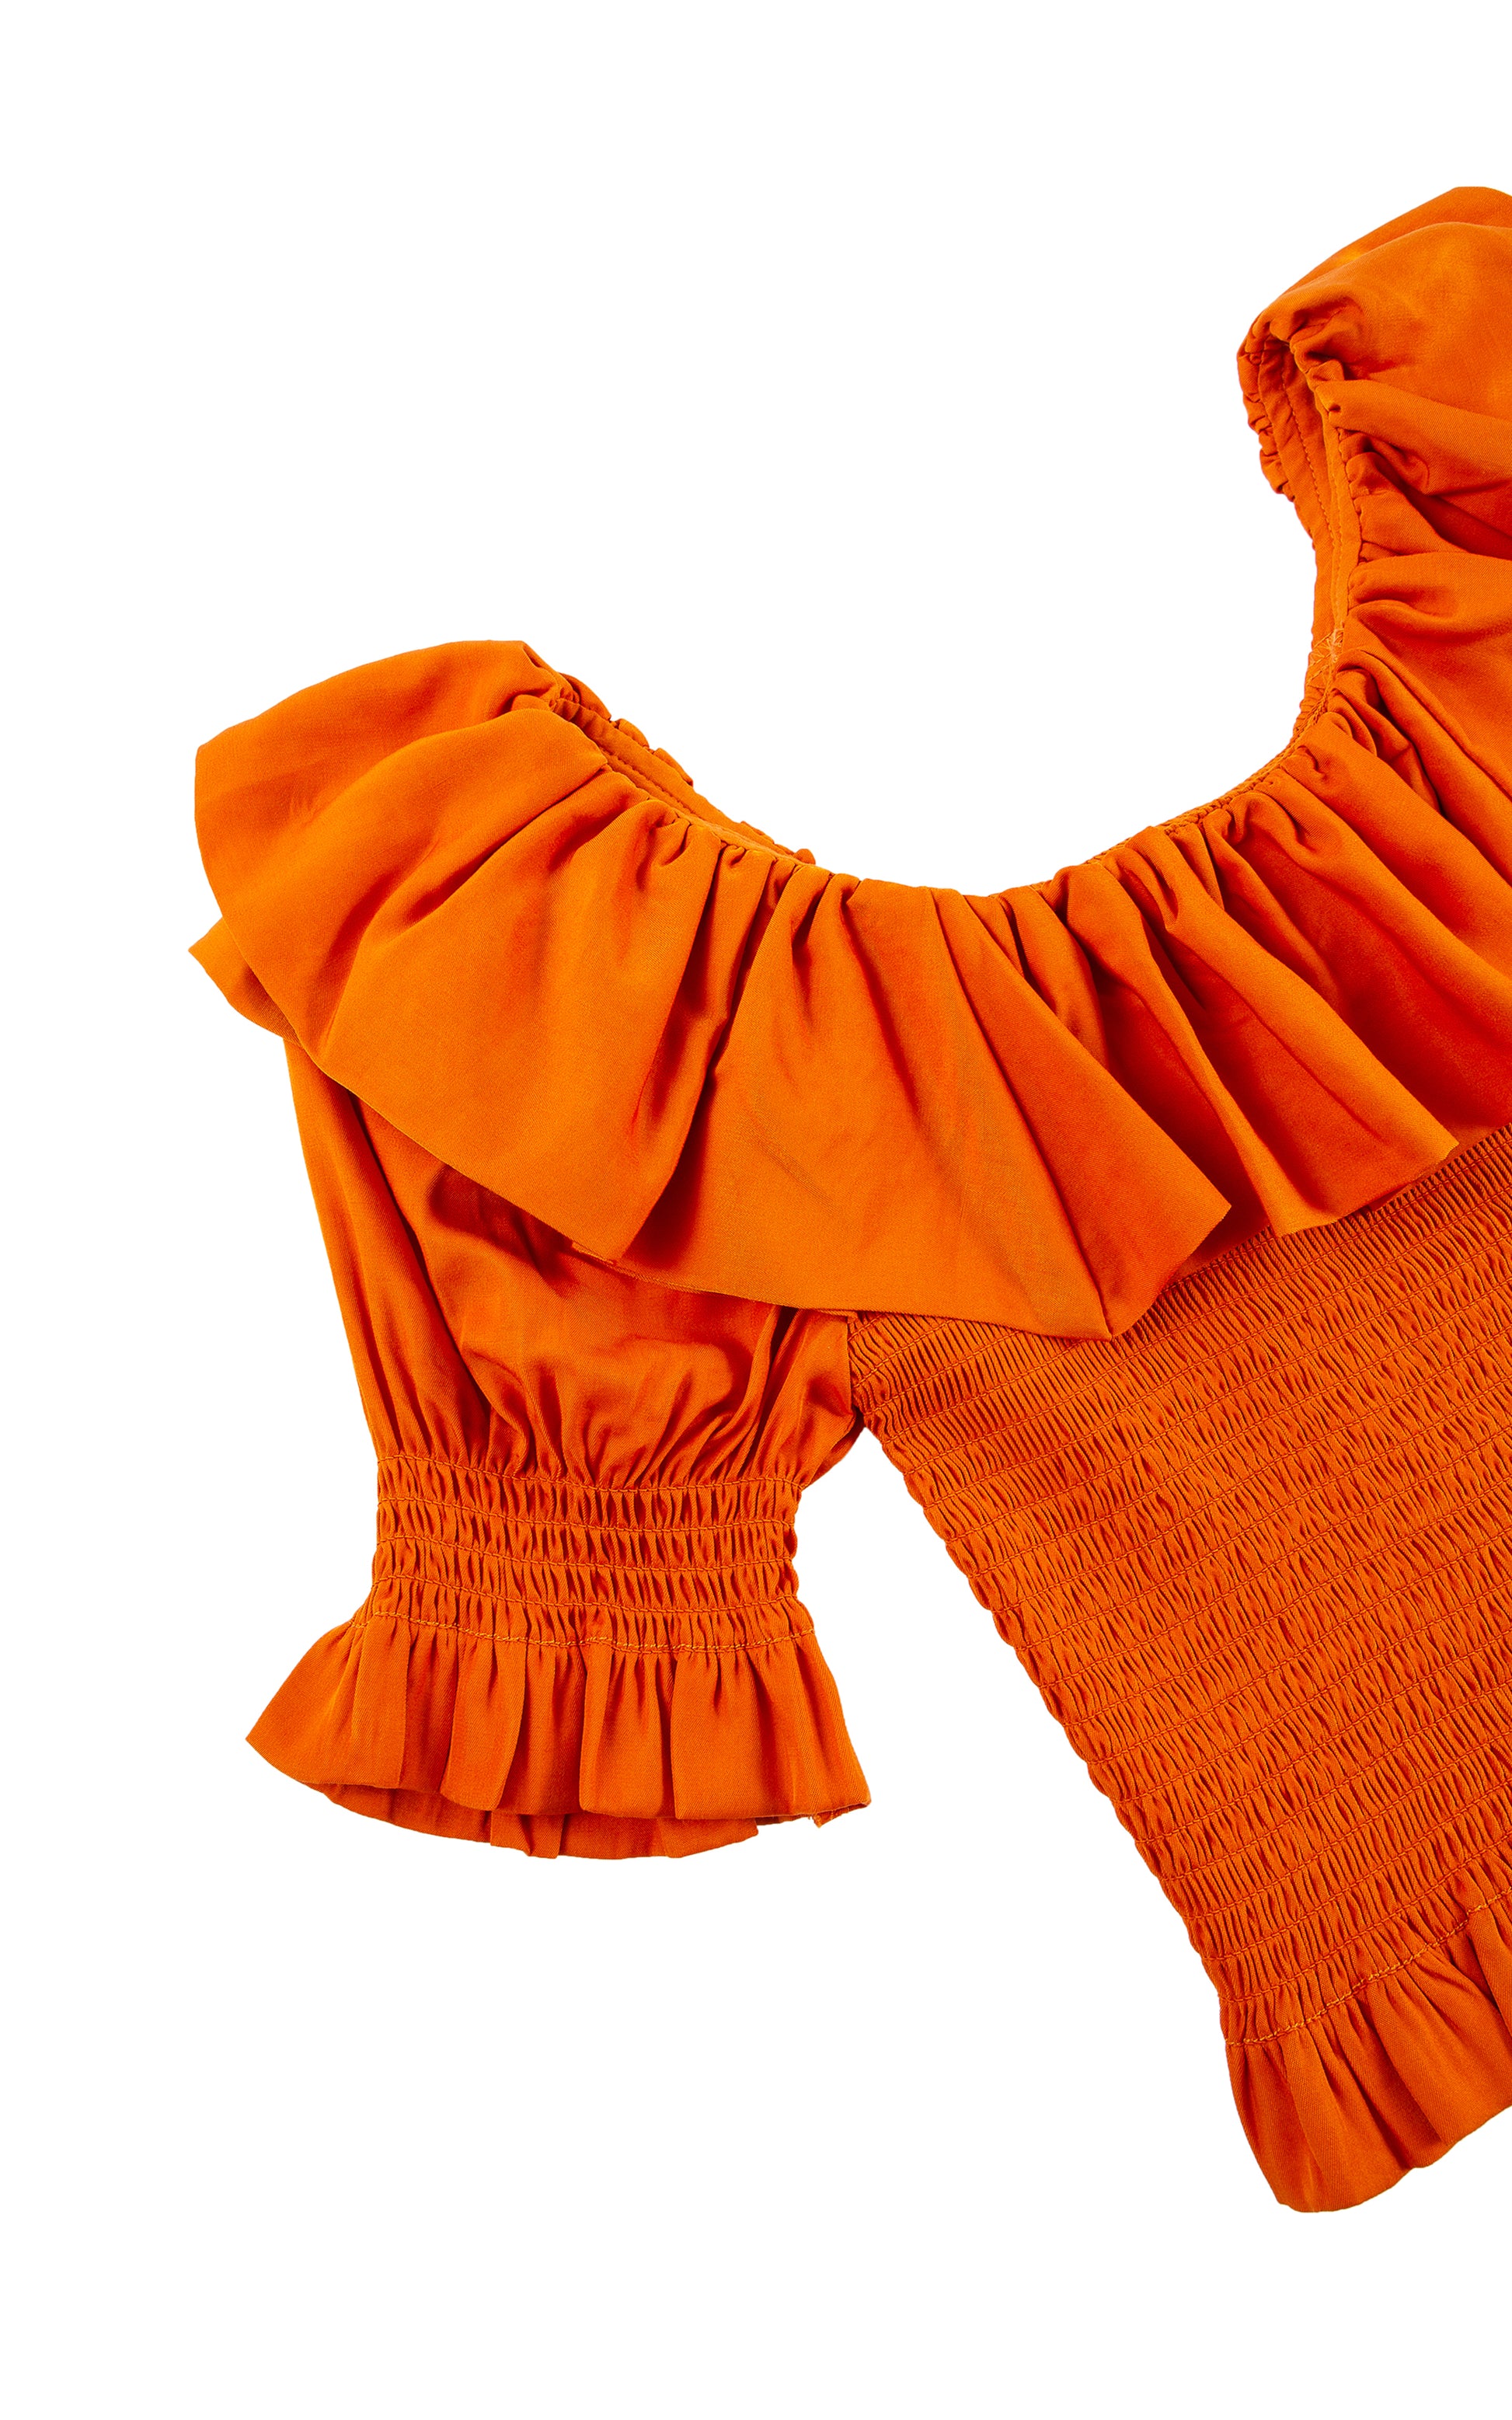 CLOSE UP OF ORANGE-RED THREE-QUARTER-LENGTH SLEEVE TOP WITH A WIDE RUFFLED NECKLINE AND A SMOCKED BODICE